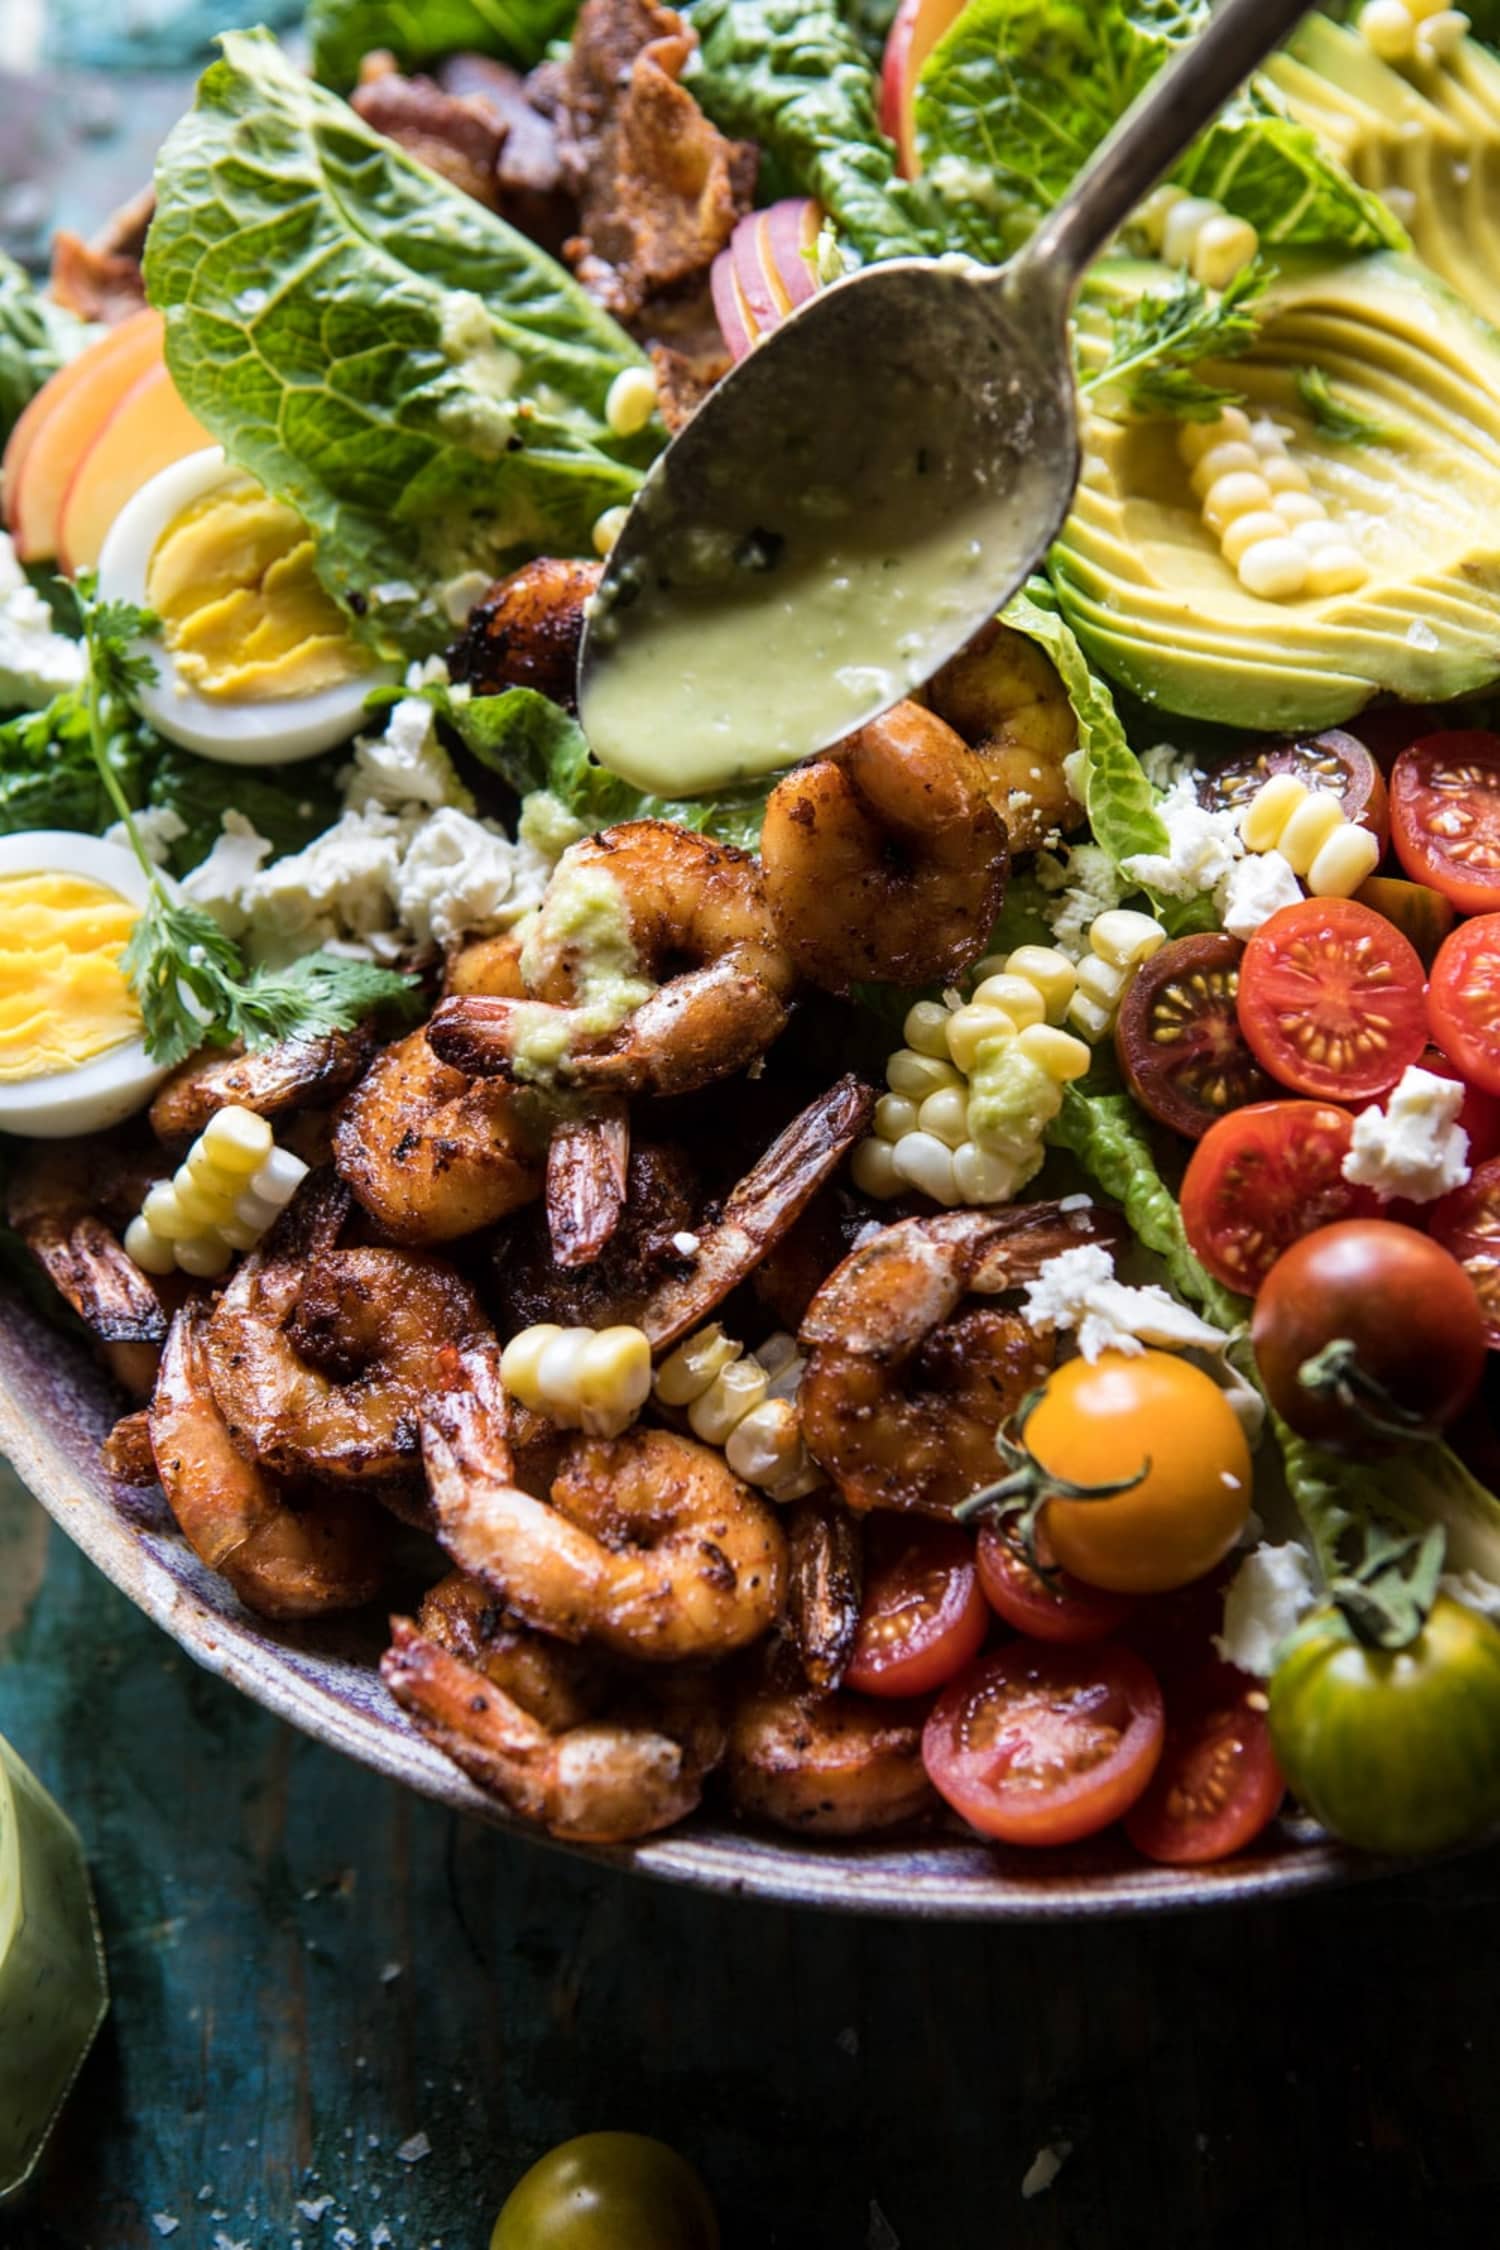 Add This Chipotle Shrimp Cobb Salad to Your Dinner Rotation